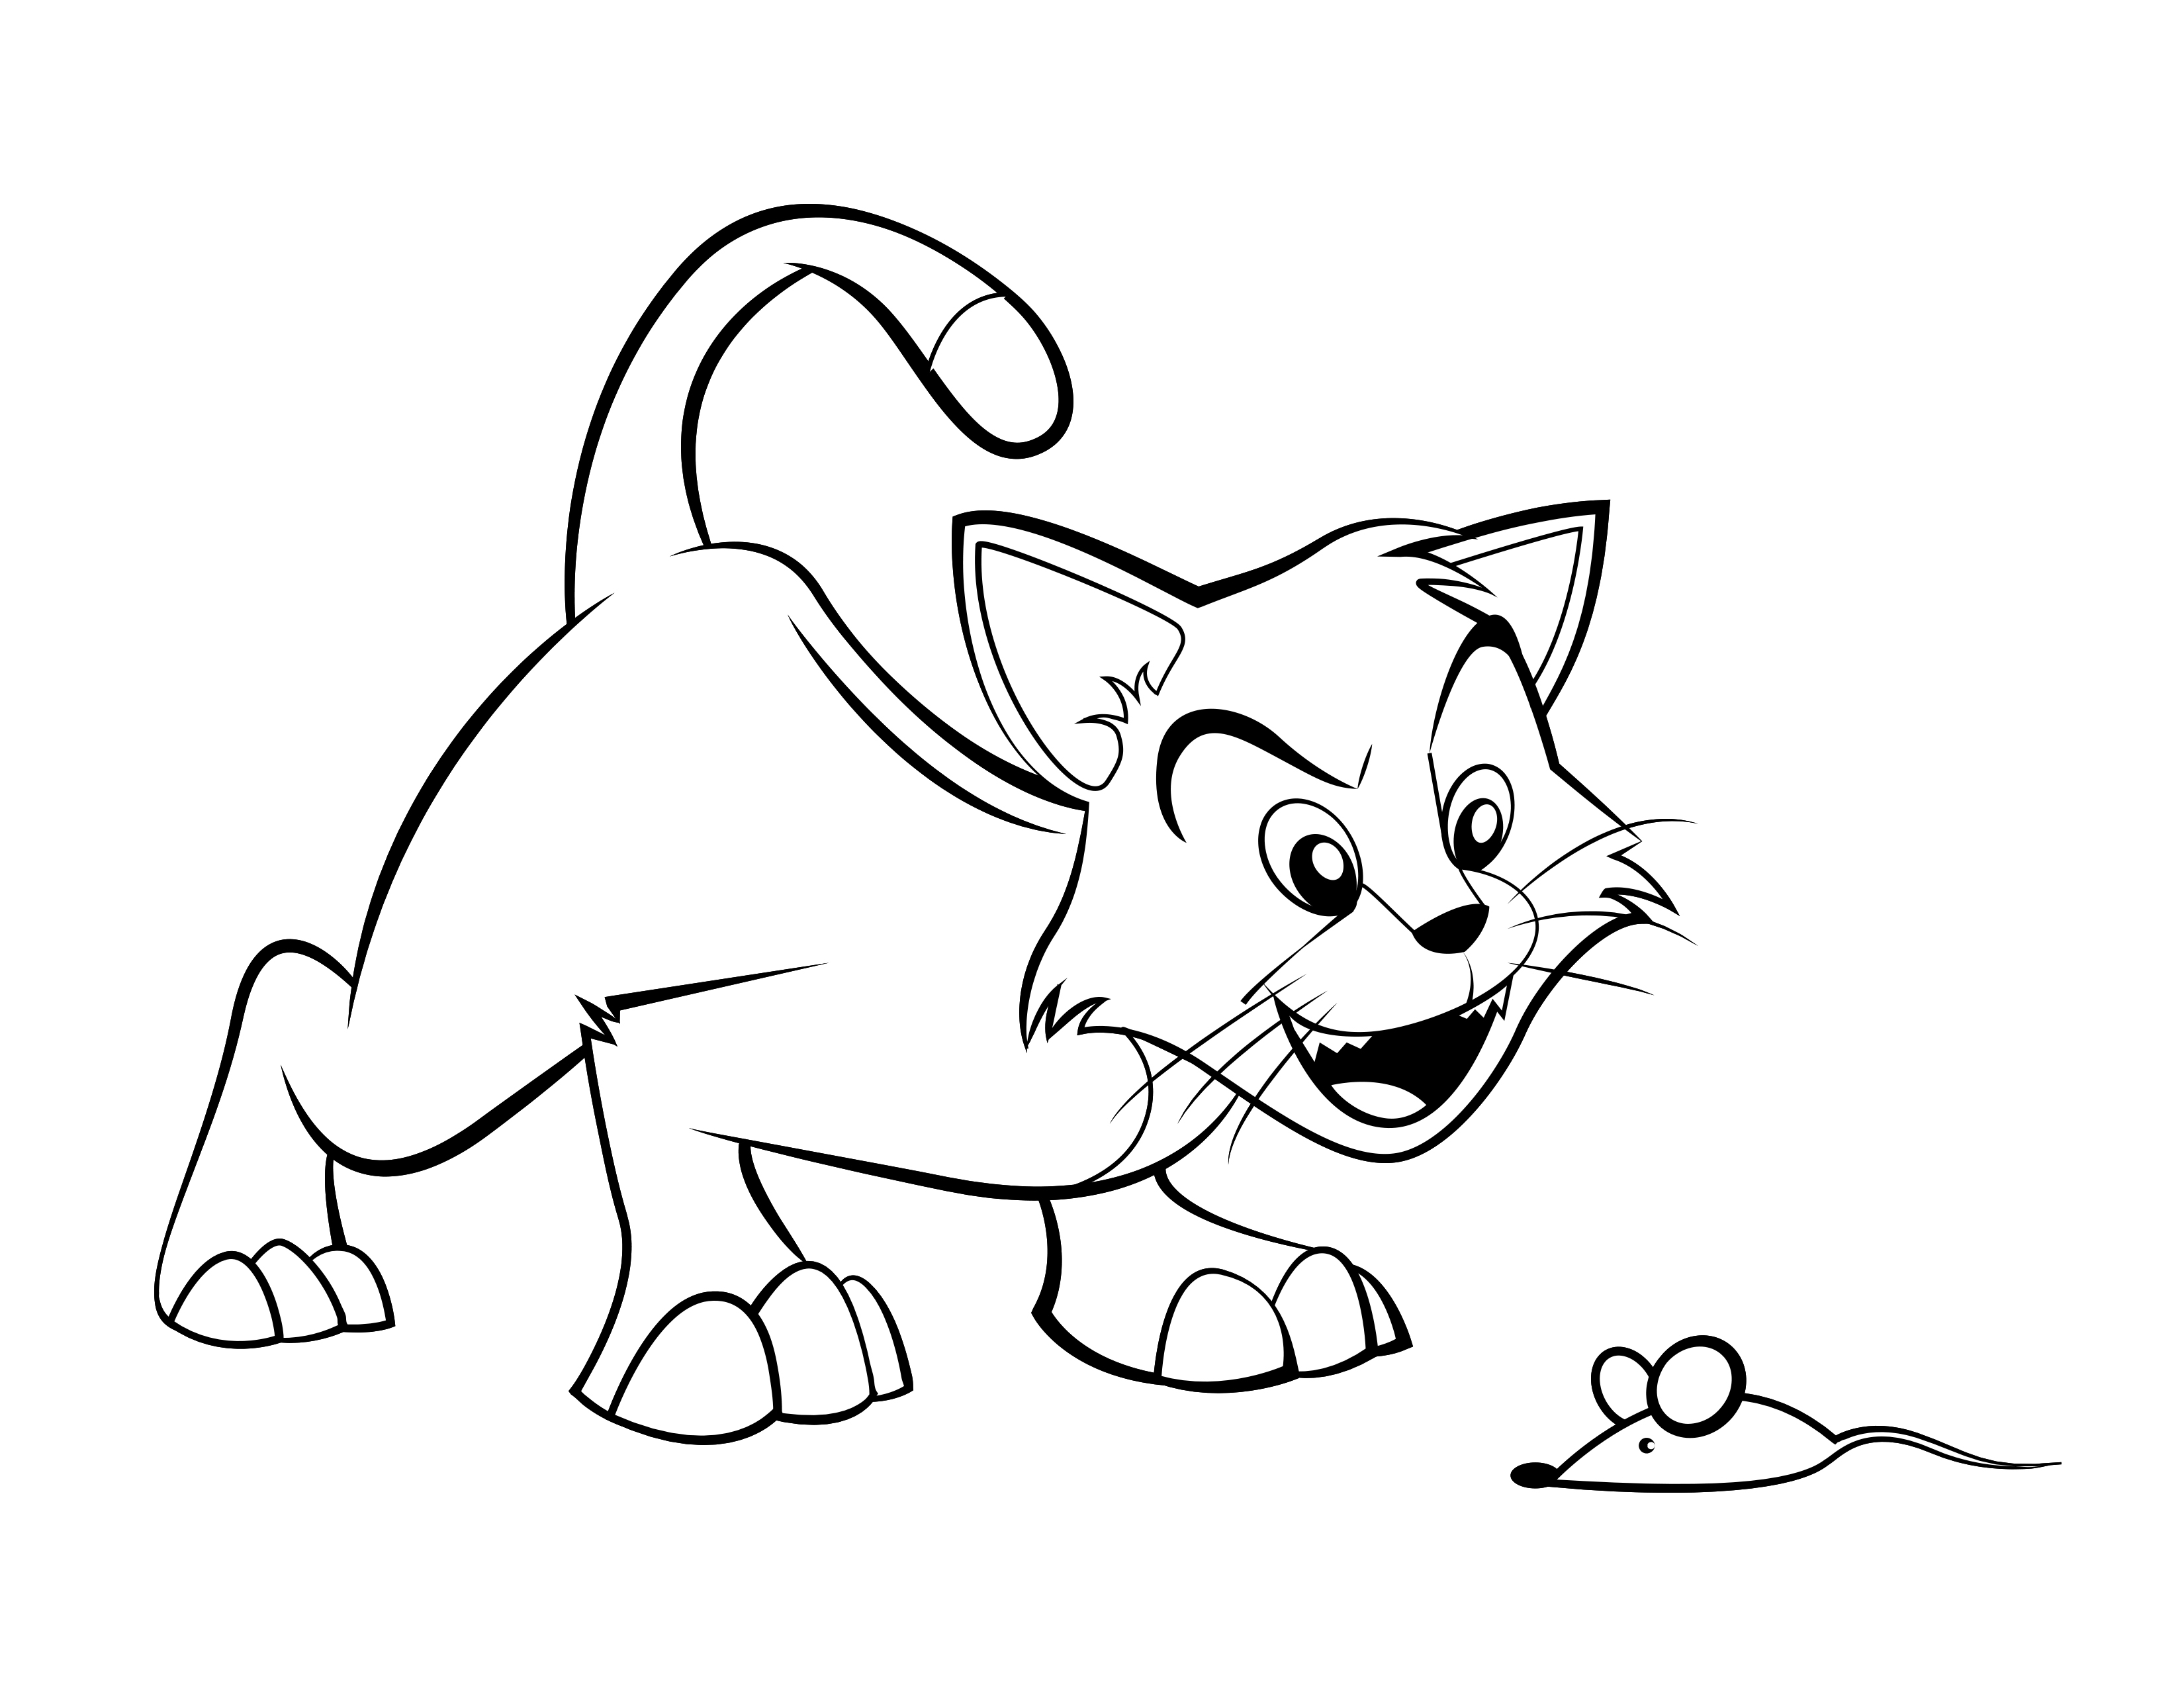 Animal Coloring Pages For 9 Year Olds / Make your world more colorful